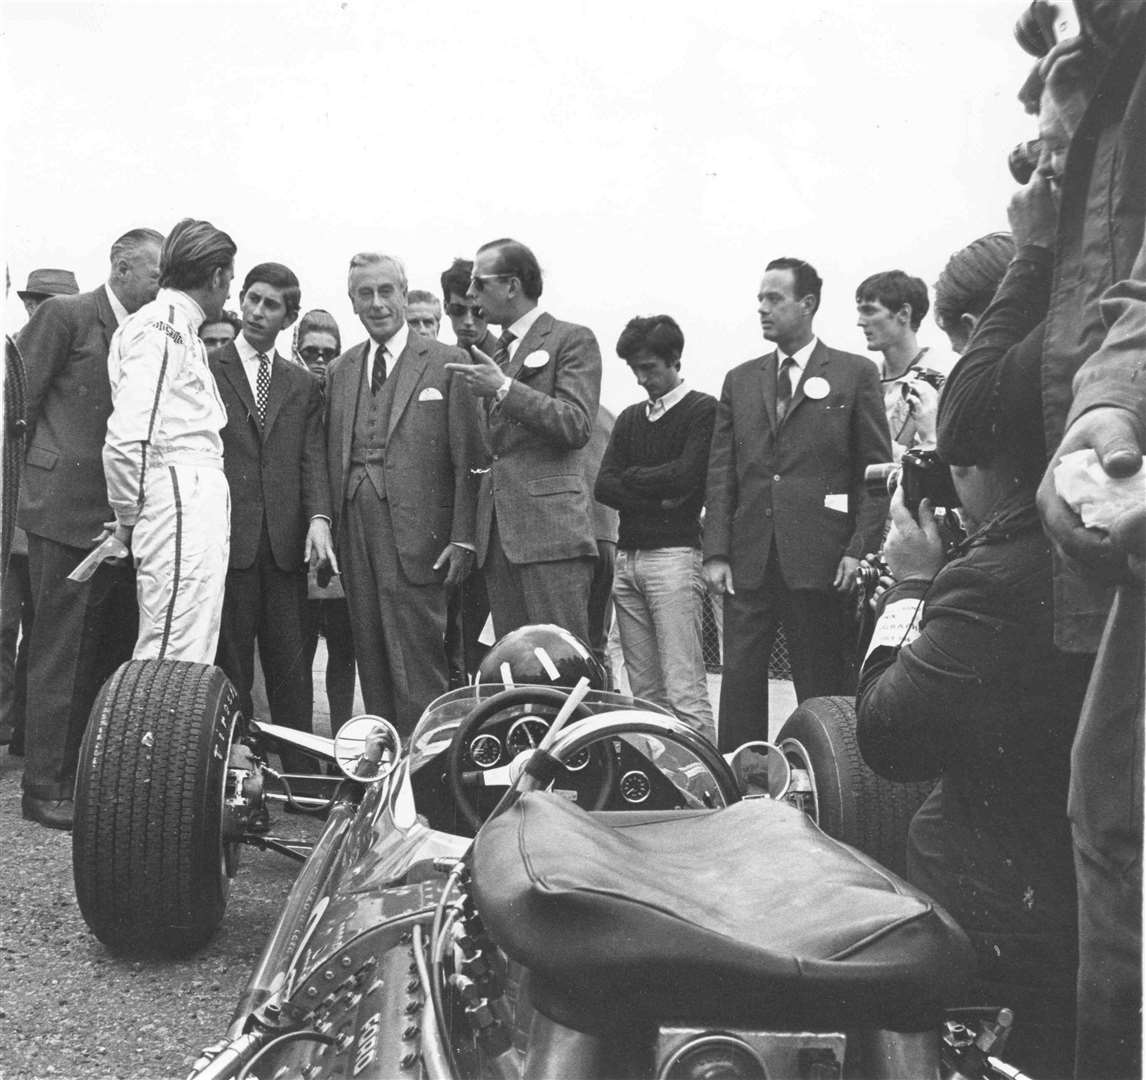 Prince Charles drove to Brands Hatch in his blue MGC GT car in July 1968, where he went to the Paddock and met some of the top Grand Prix stars including Graham Hill